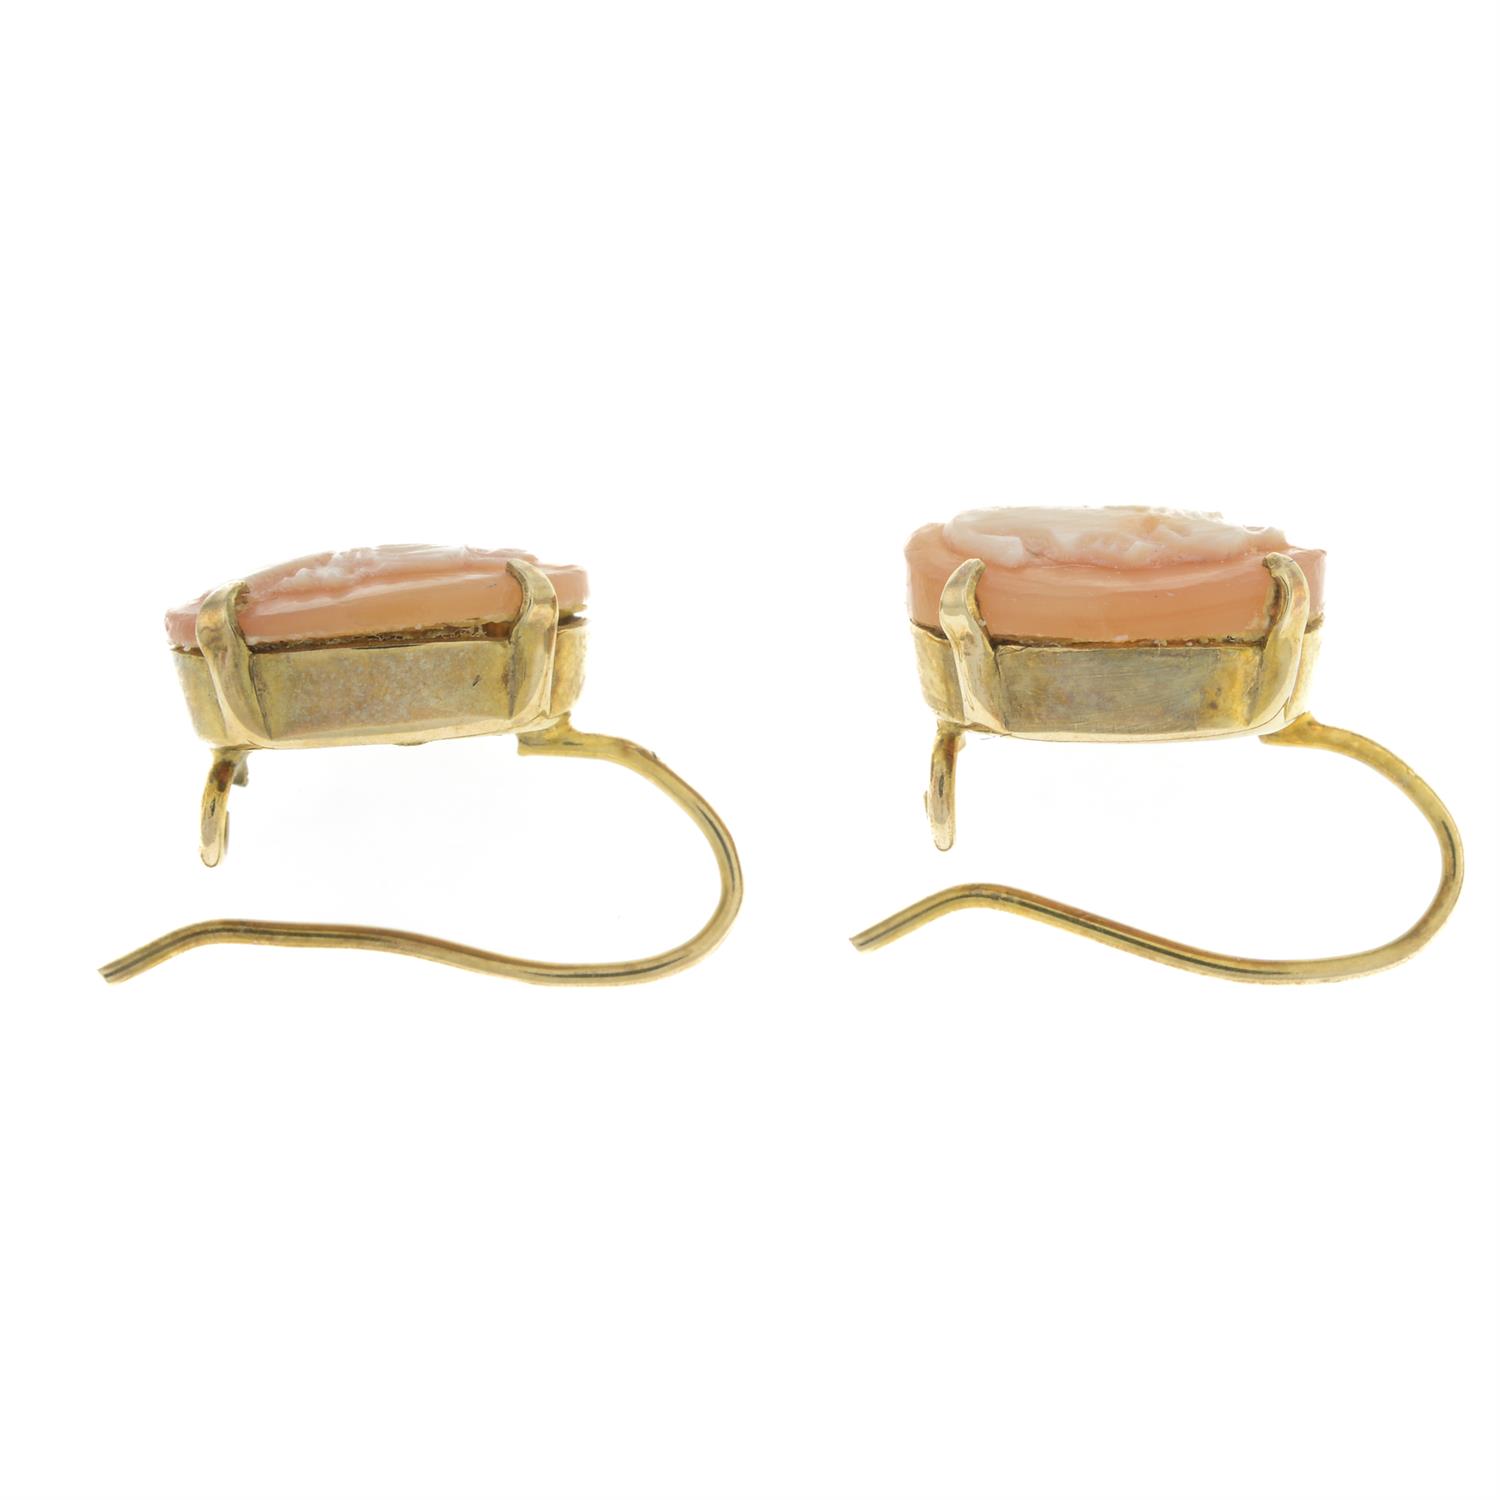 9ct gold shell cameo earrings - Image 3 of 3